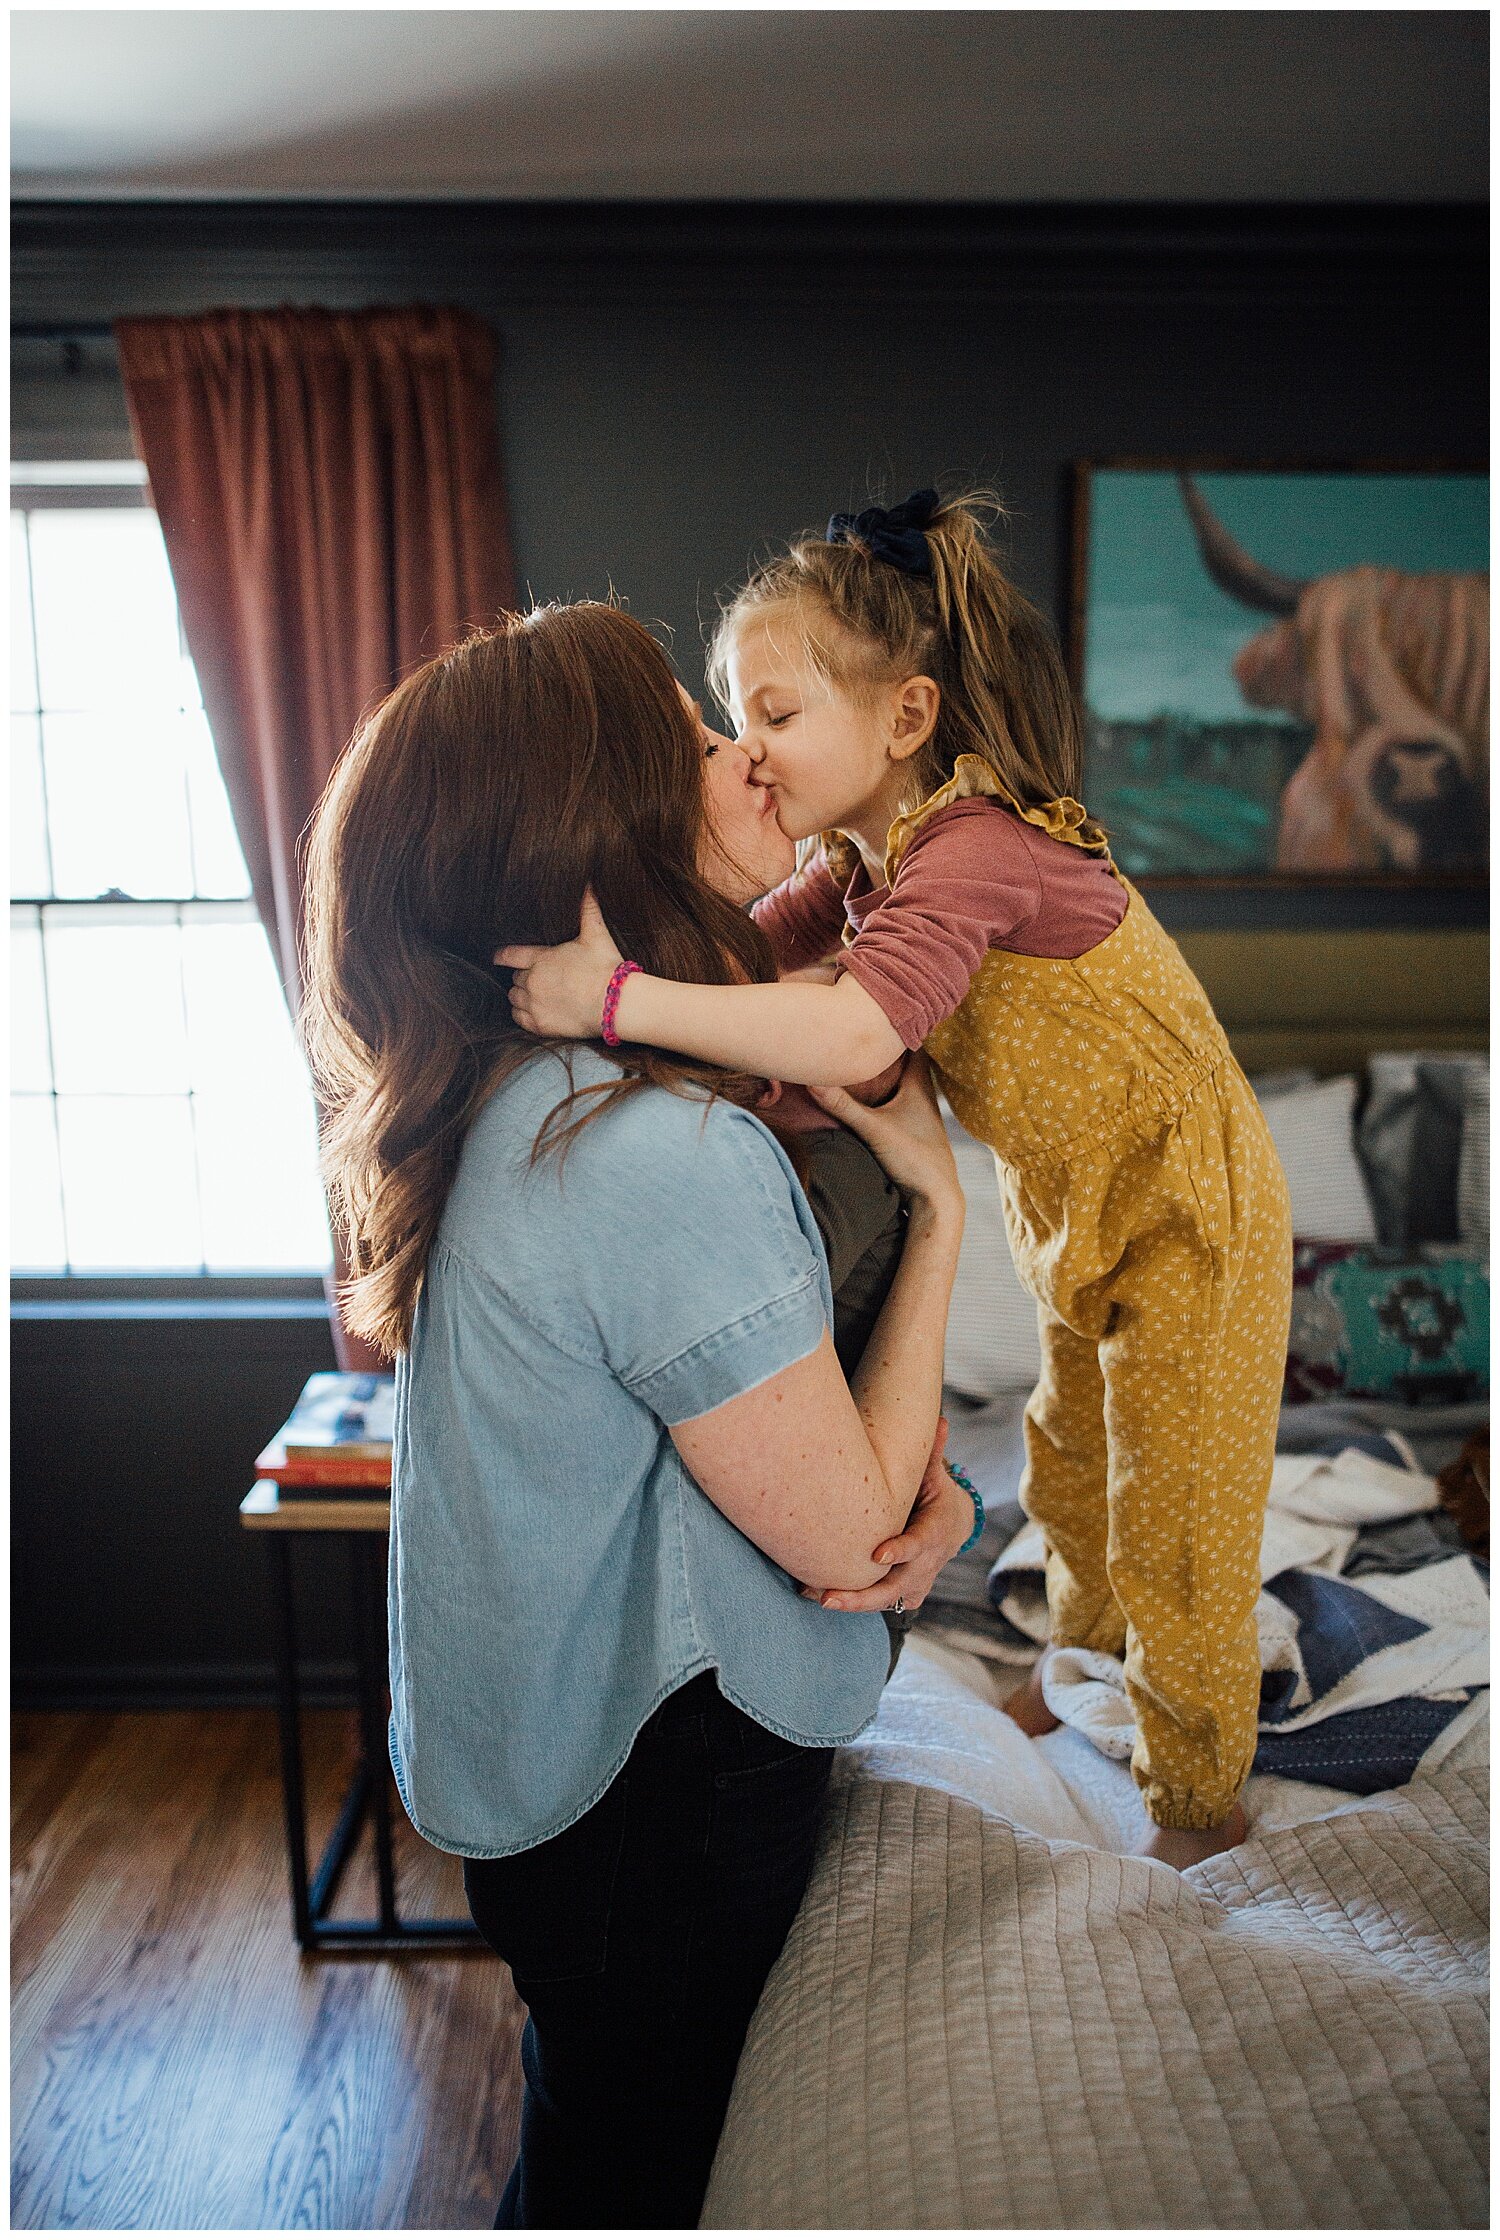 Louisville family photography | lifestyle photography | home photo session | family | Kelly Lovan photography | documentary photography | home photography | motherhood